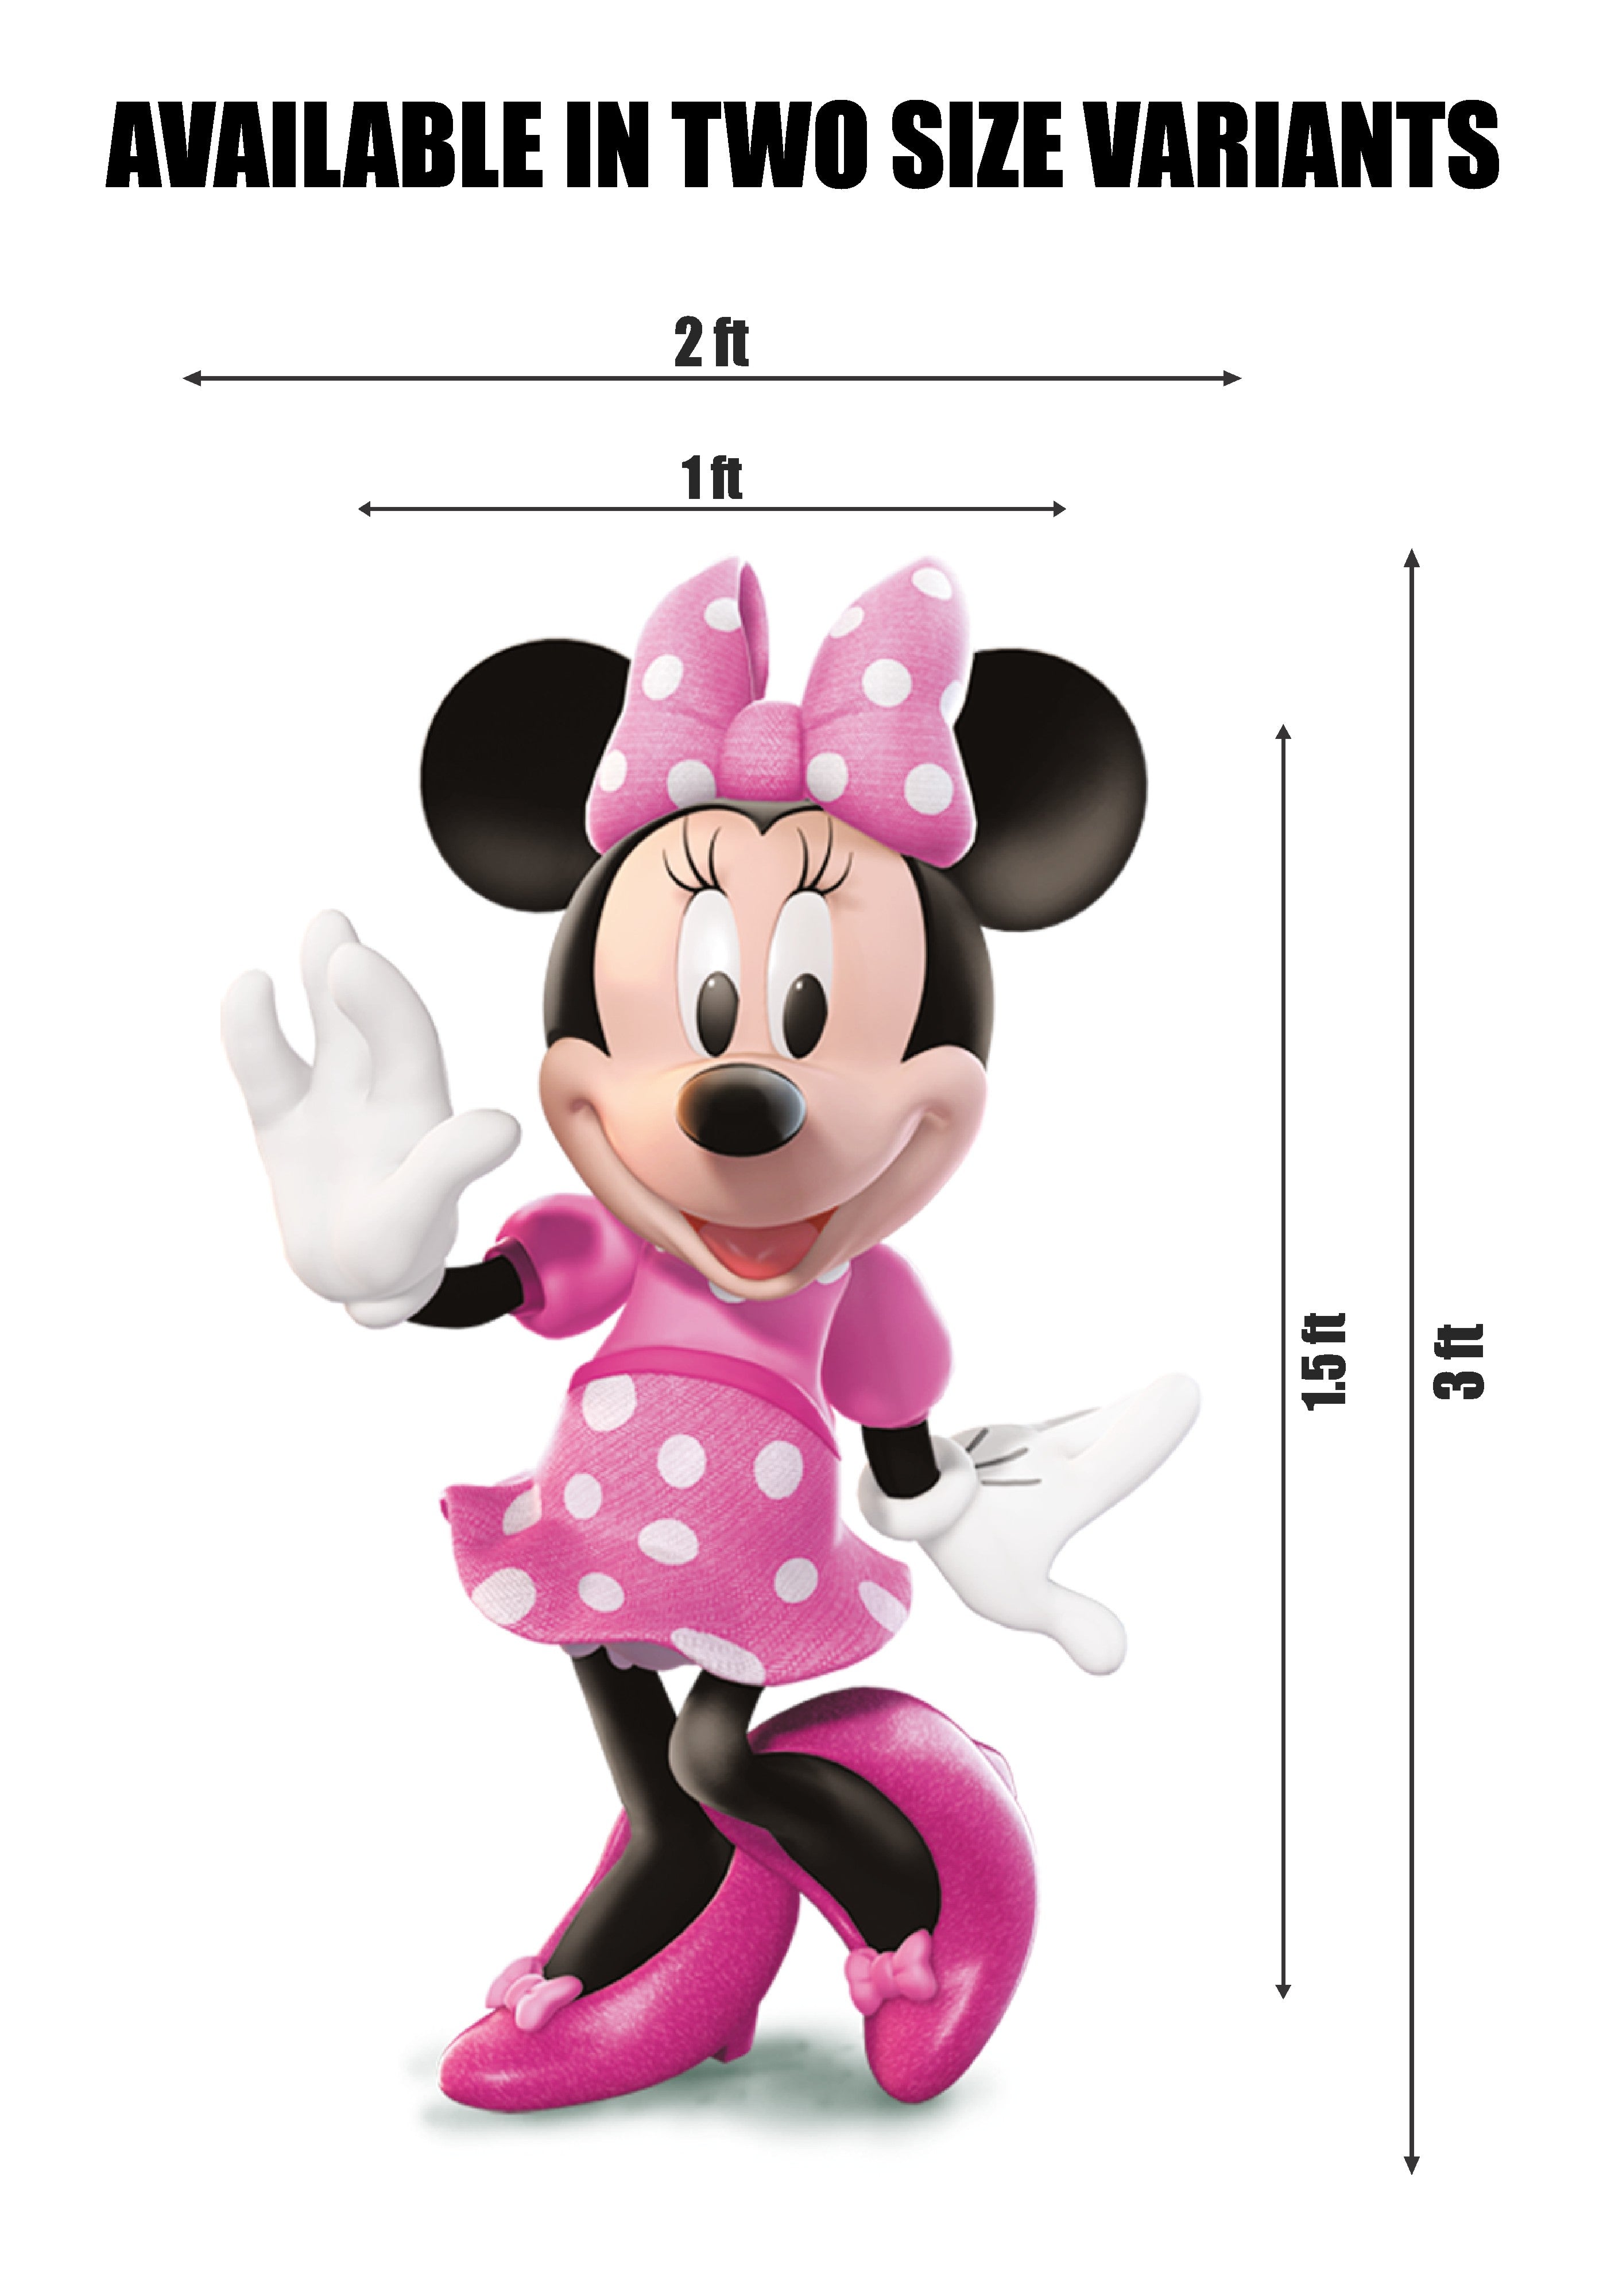 Disney Traditions St. Patrick's Minnie Mouse Personality Pose Figurine  6010109